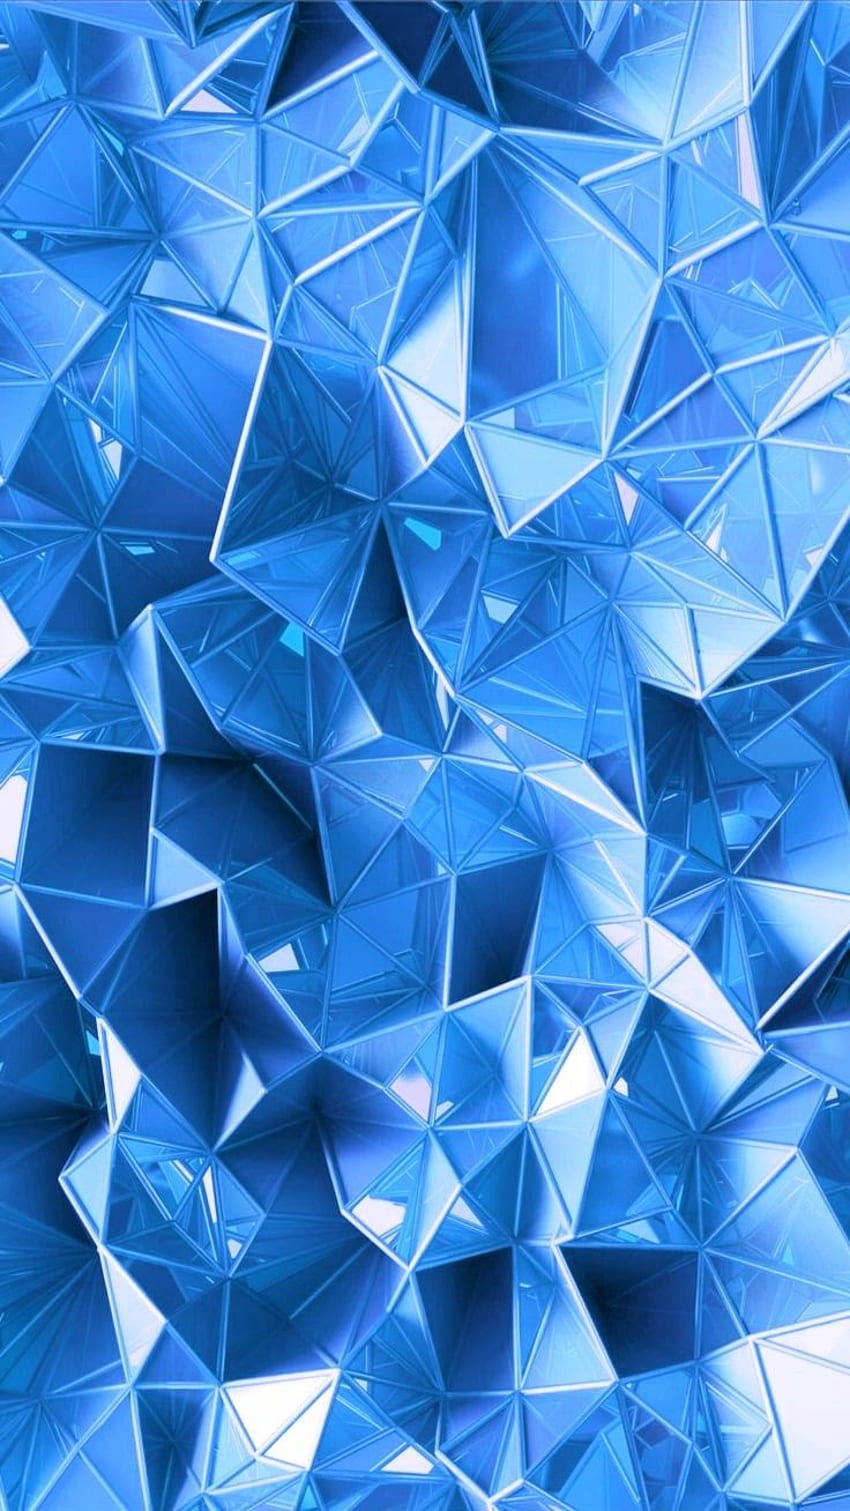 Blue diamond Images  Search Images on Everypixel